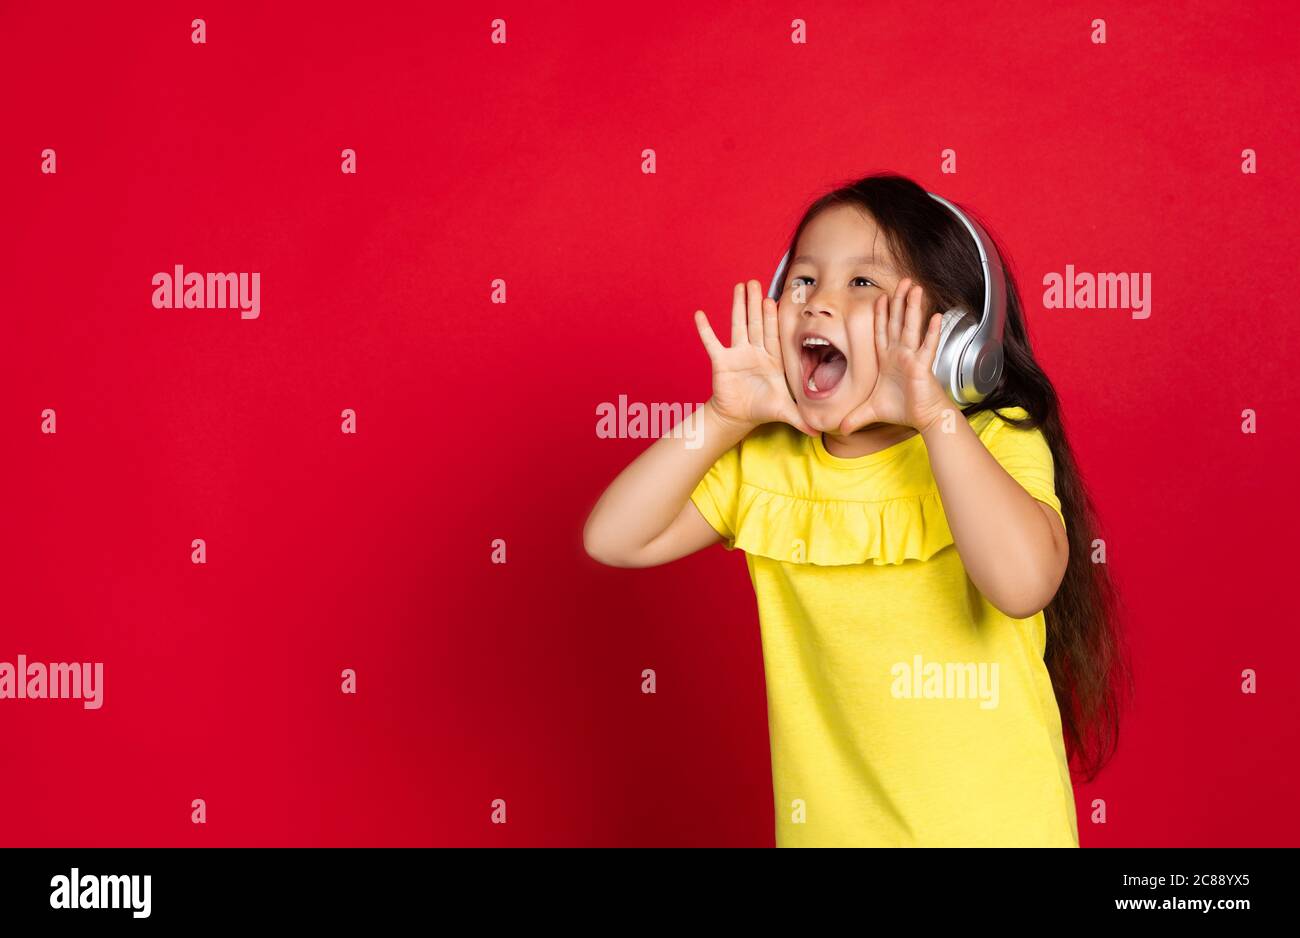 Shouting for sales, wearing headphones. Beautiful little girl on red background. Half-lenght portrait of happy child. Cute asian girl in yellow. Concept of facial expression, human emotions, childhood. Stock Photo